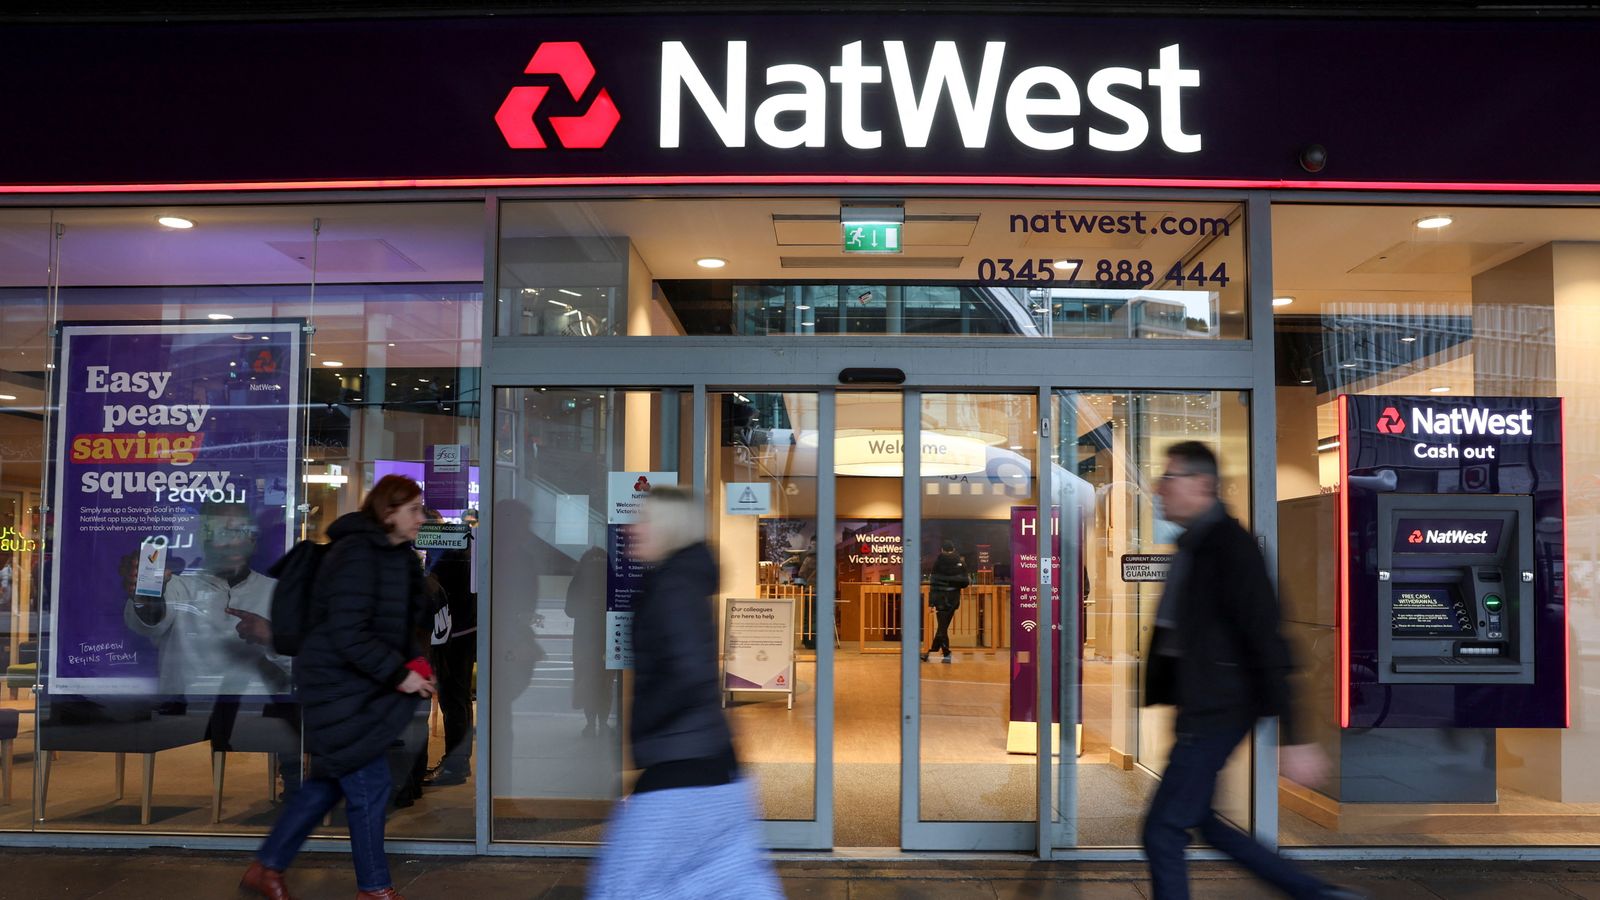 Election campaign to derail multibillion NatWest retail offer